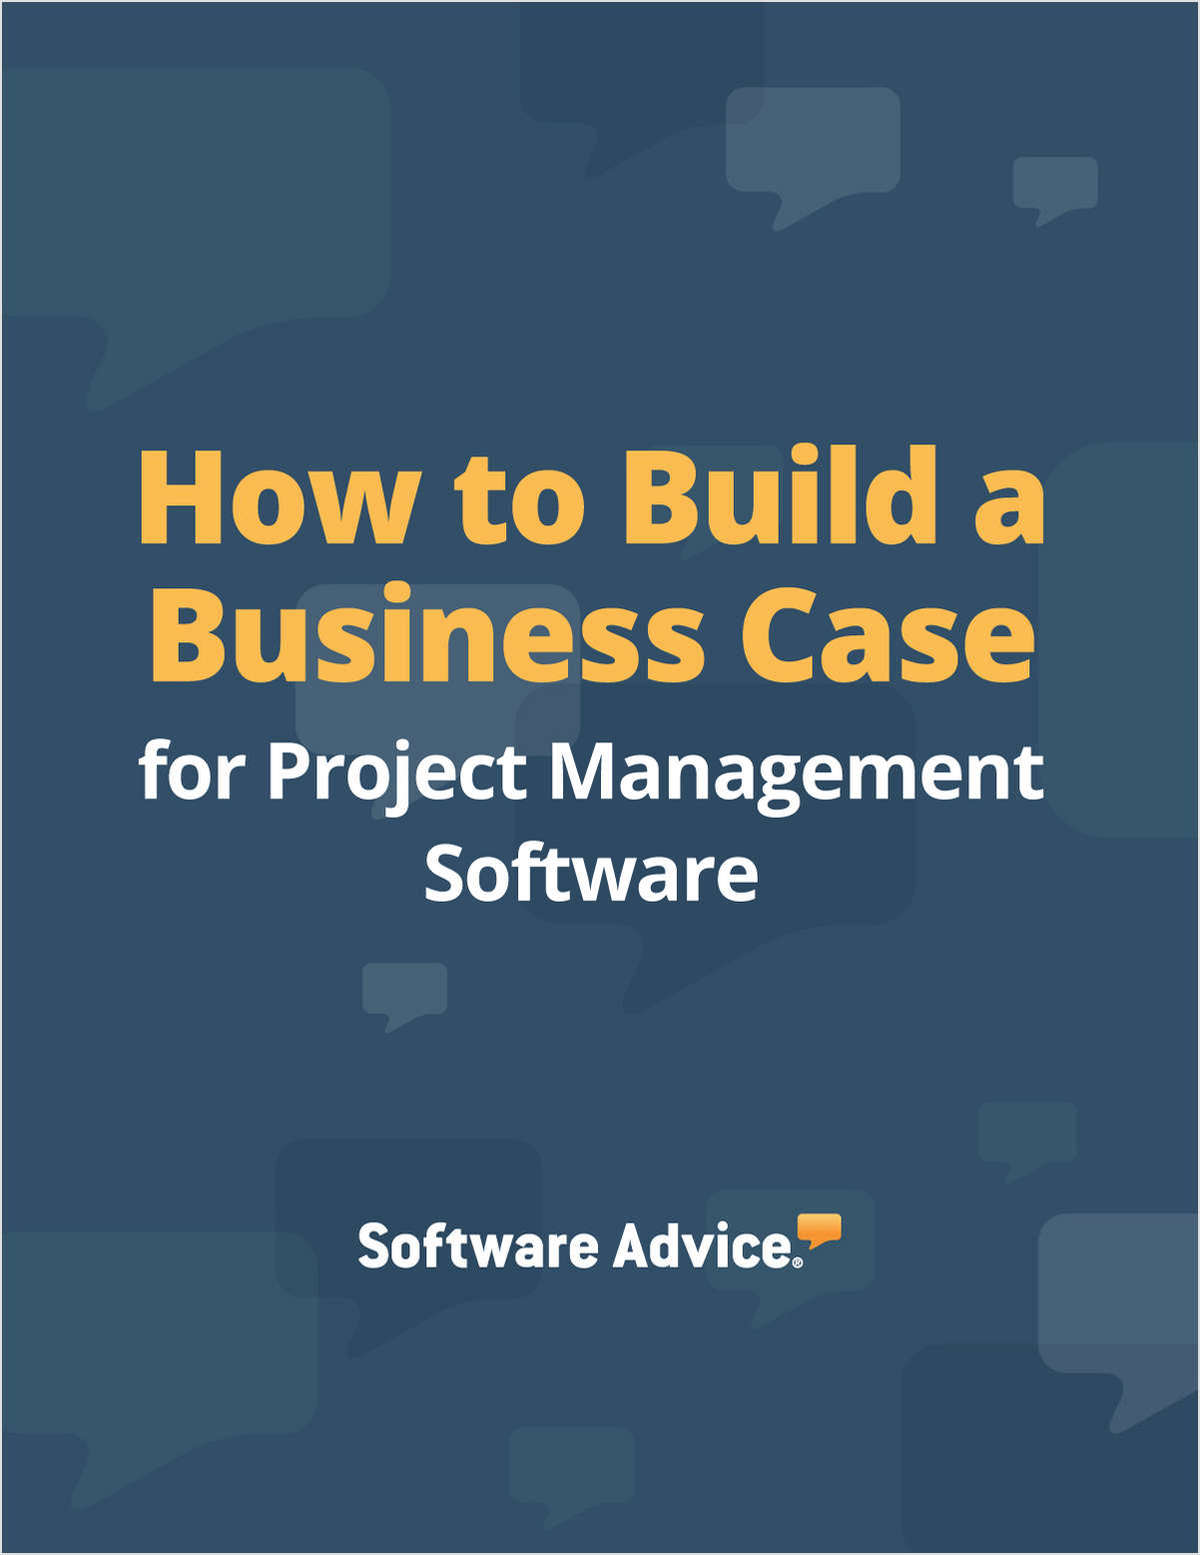 How to Build a Business Case for Project Management Software